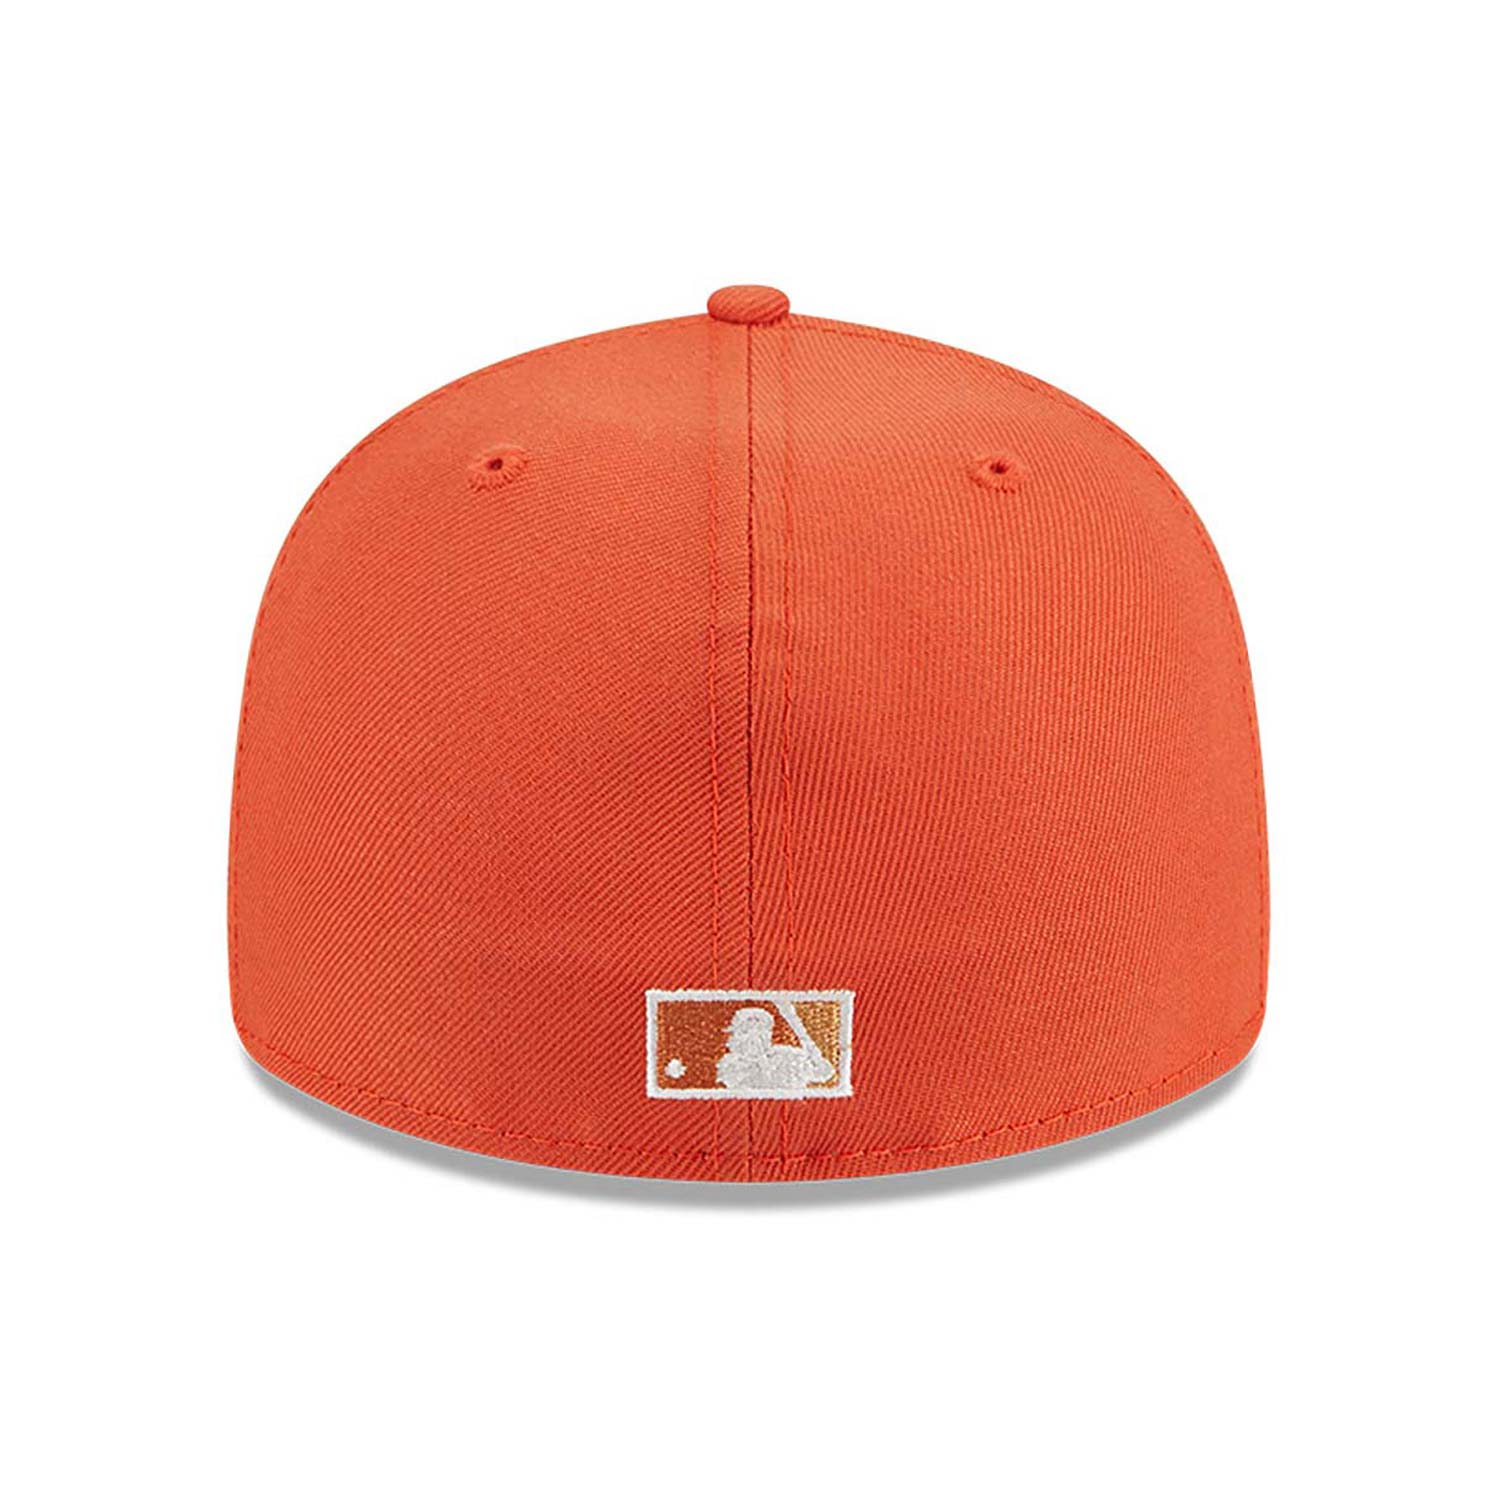 San Francisco Giants Repreve Orange Low Profile 59FIFTY Fitted Cap